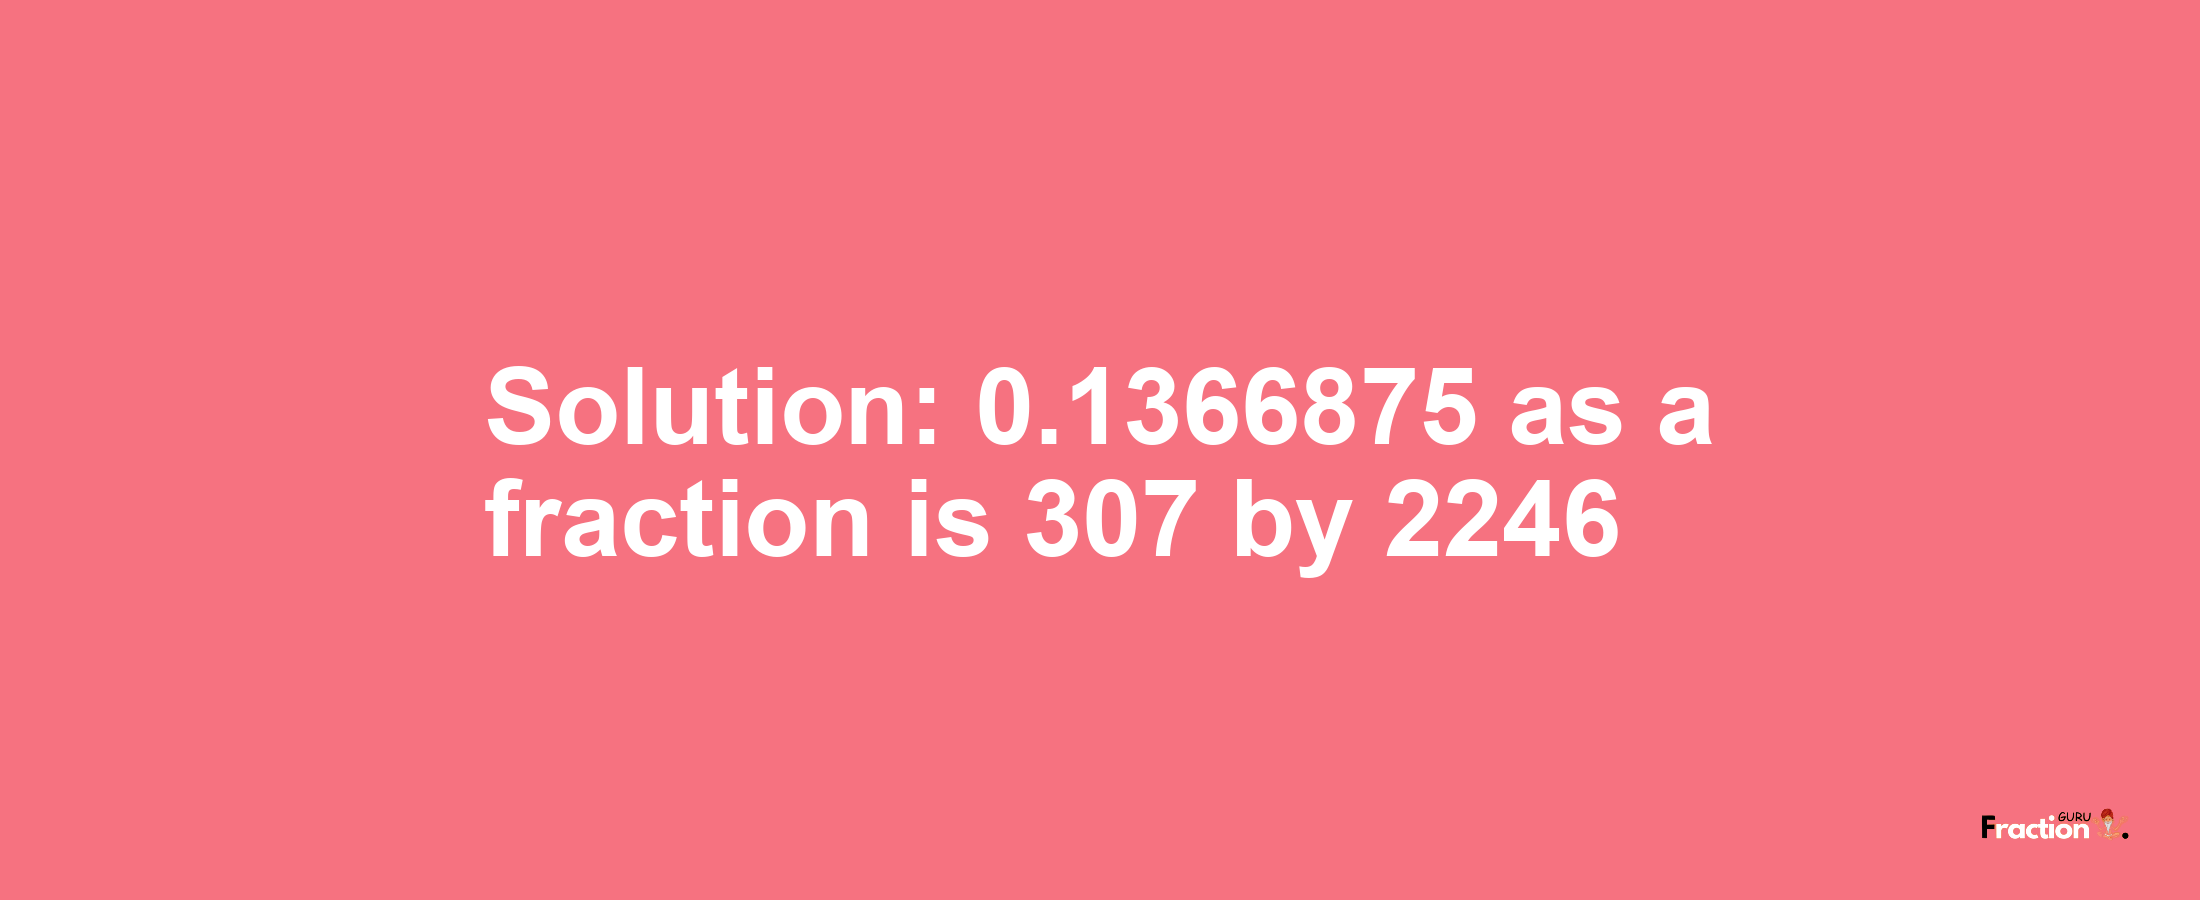 Solution:0.1366875 as a fraction is 307/2246